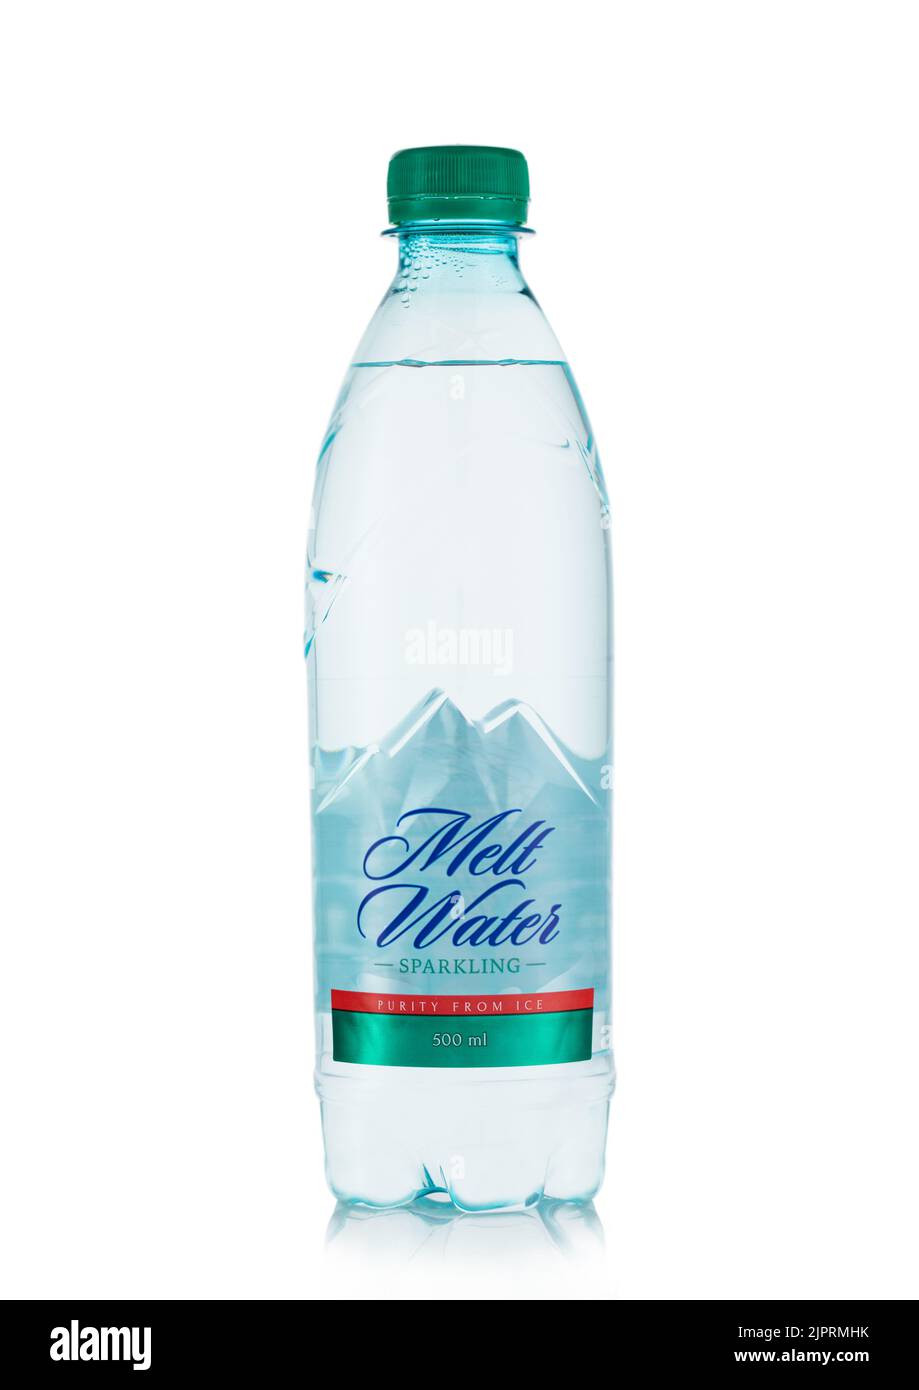 LONDON,UK - MAY 10, 2022: Bottle of Melt Water sparkling and mineral purity from ice on white. Stock Photo